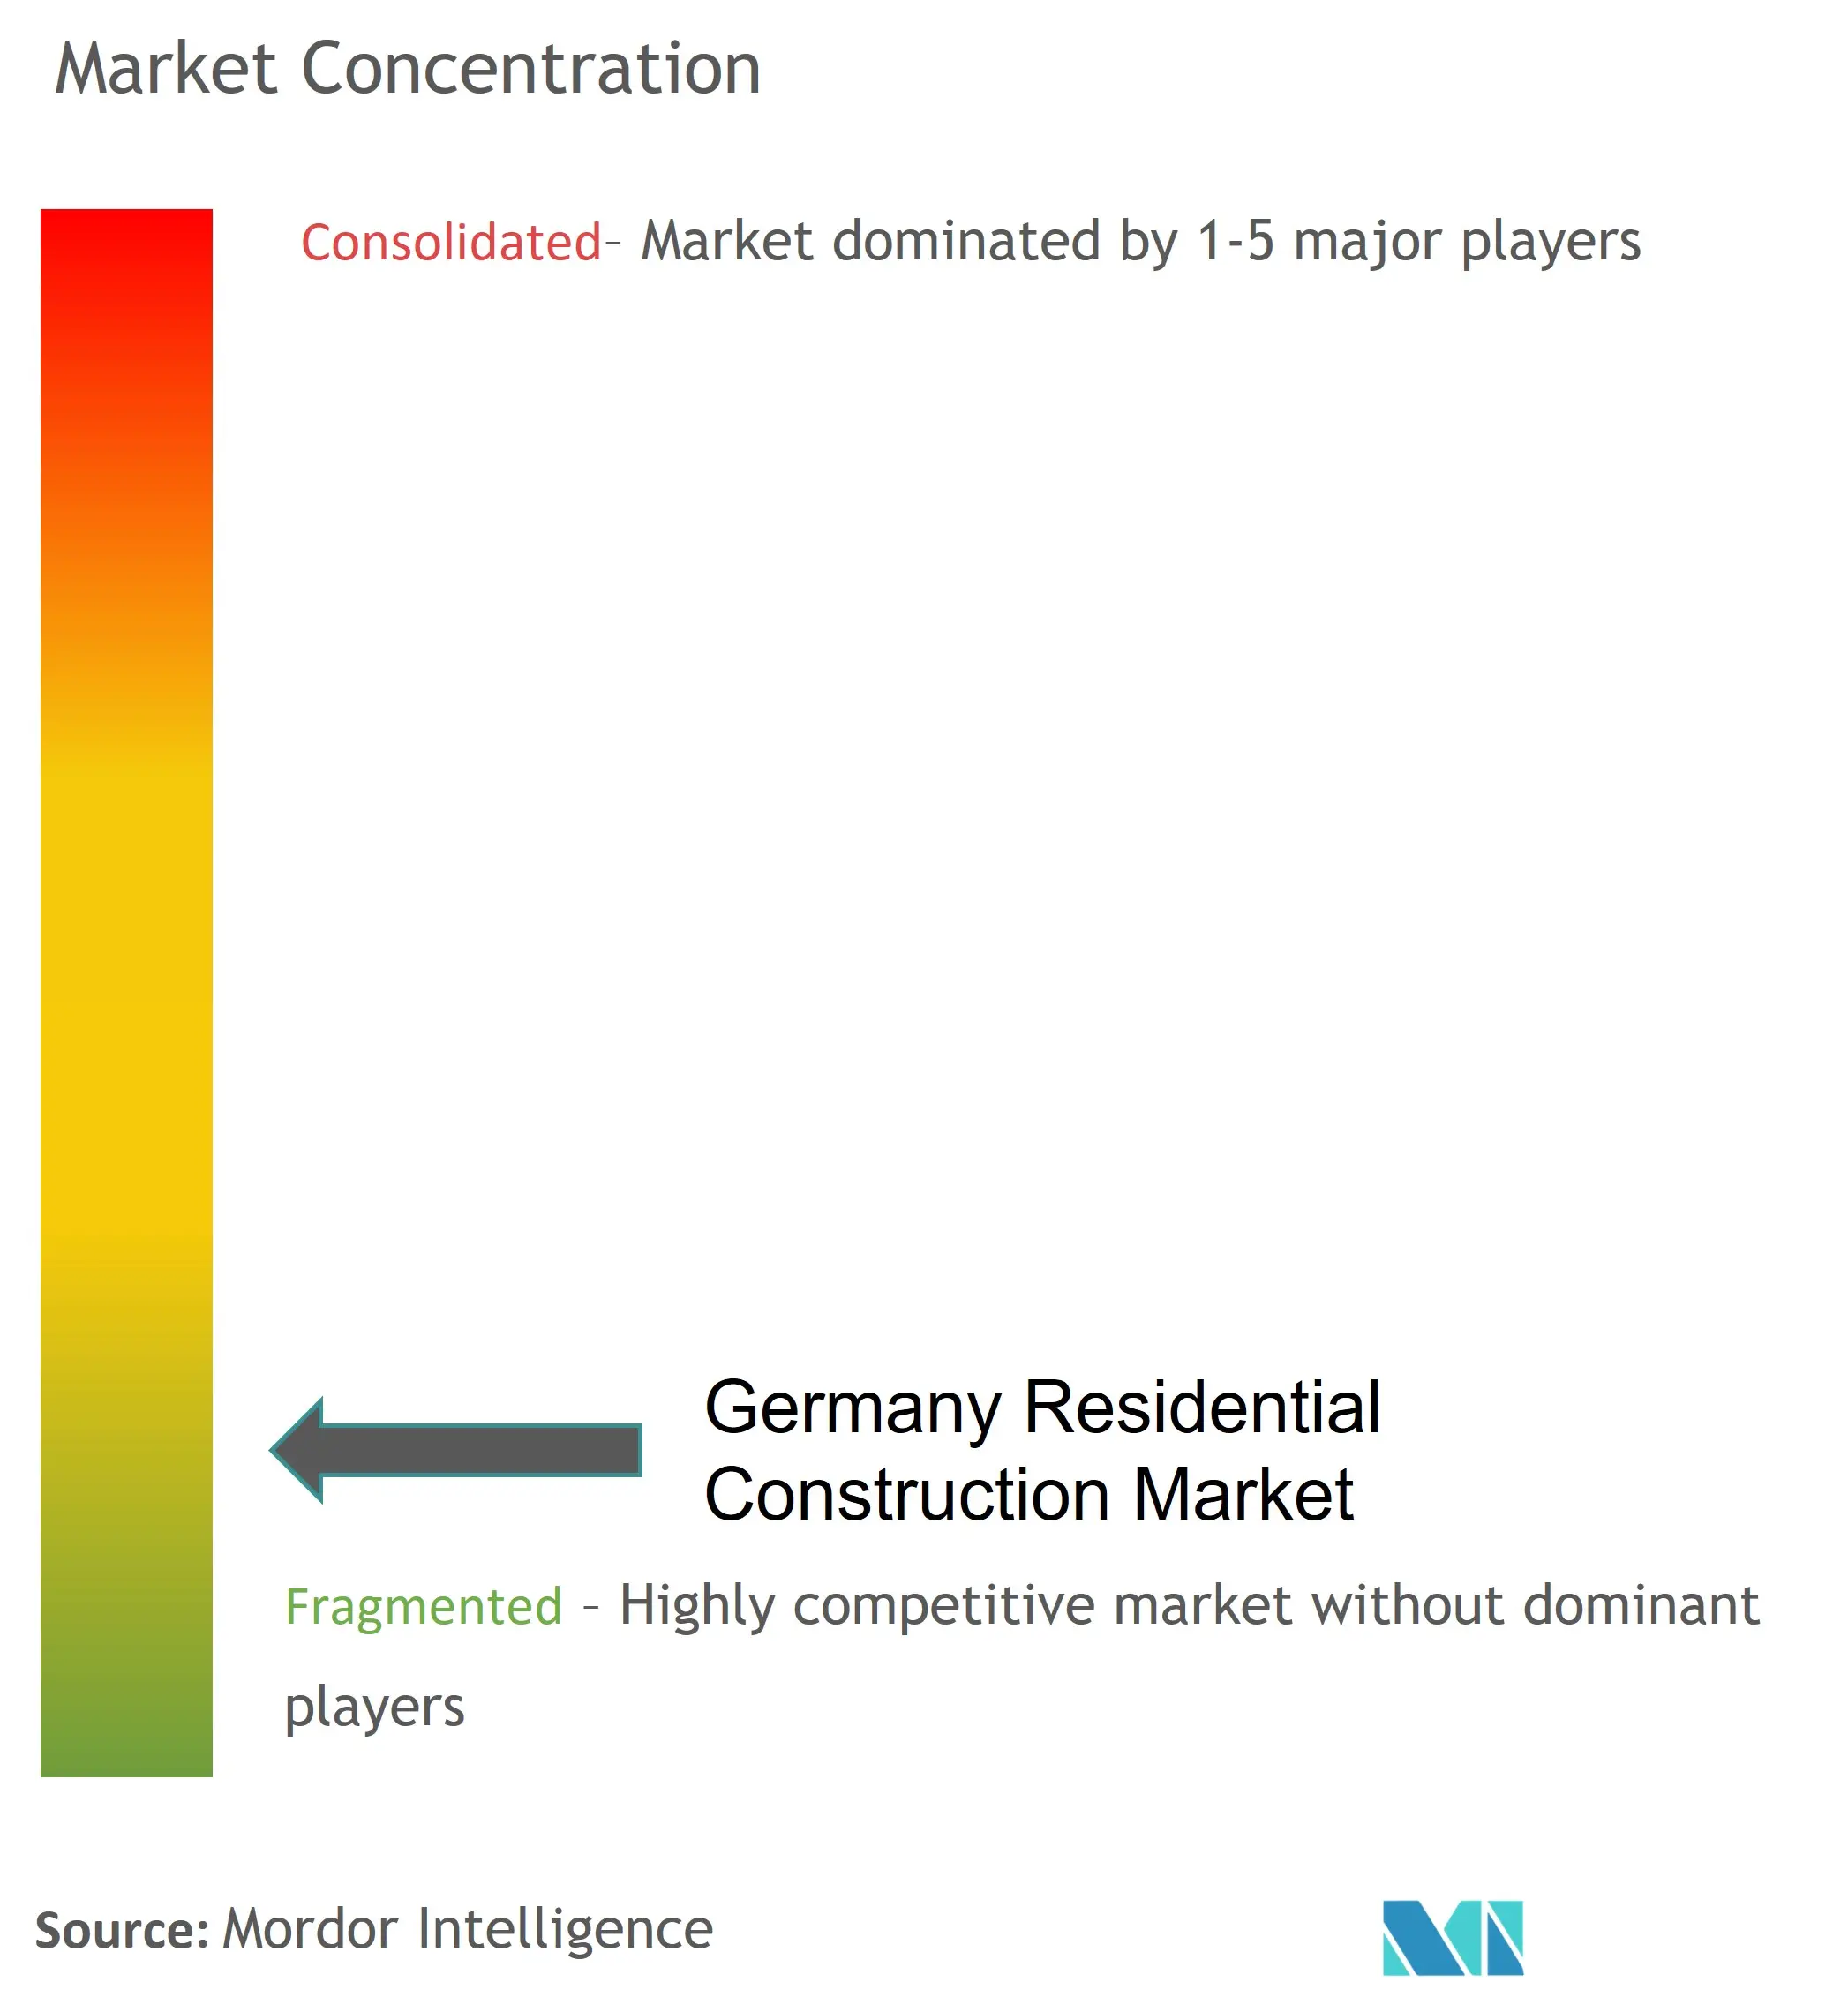 Germany Residential Construction Market Concentration